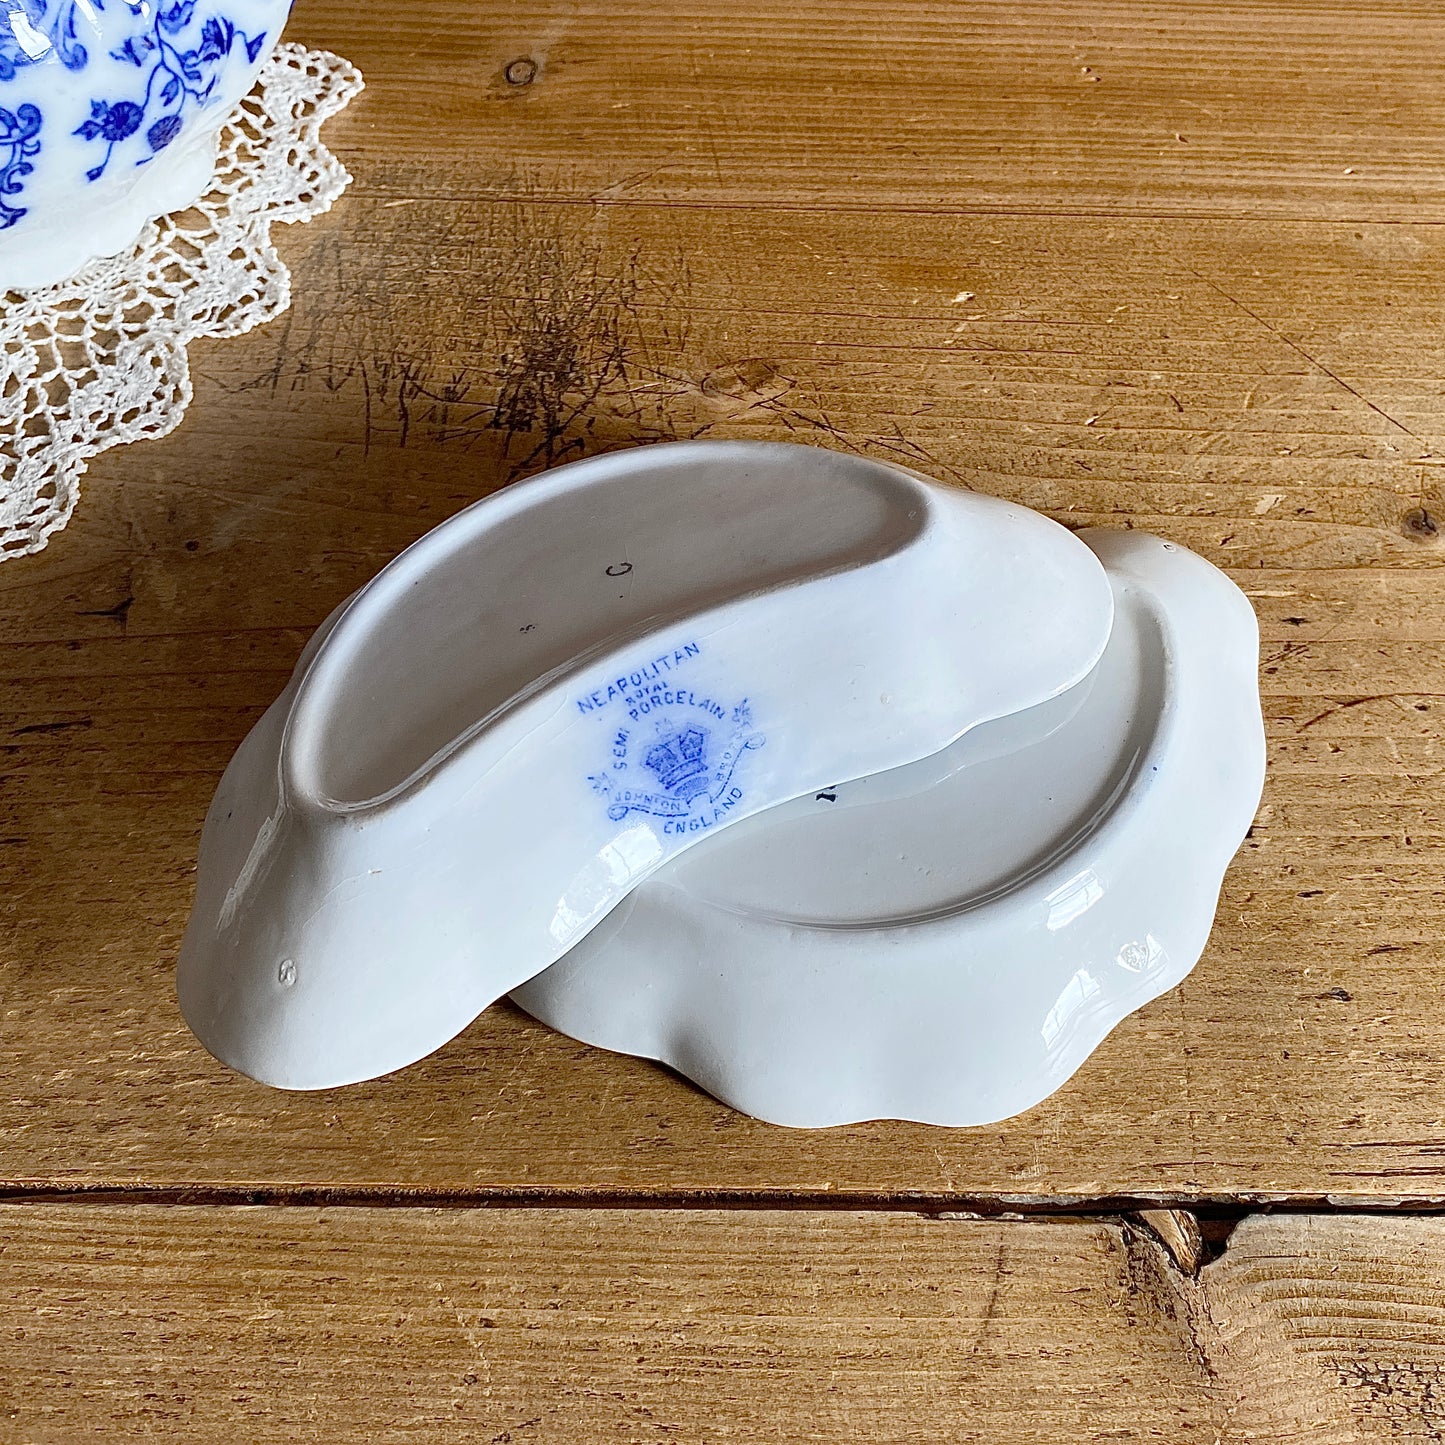 Pair of Flow Blue Candy Dishes